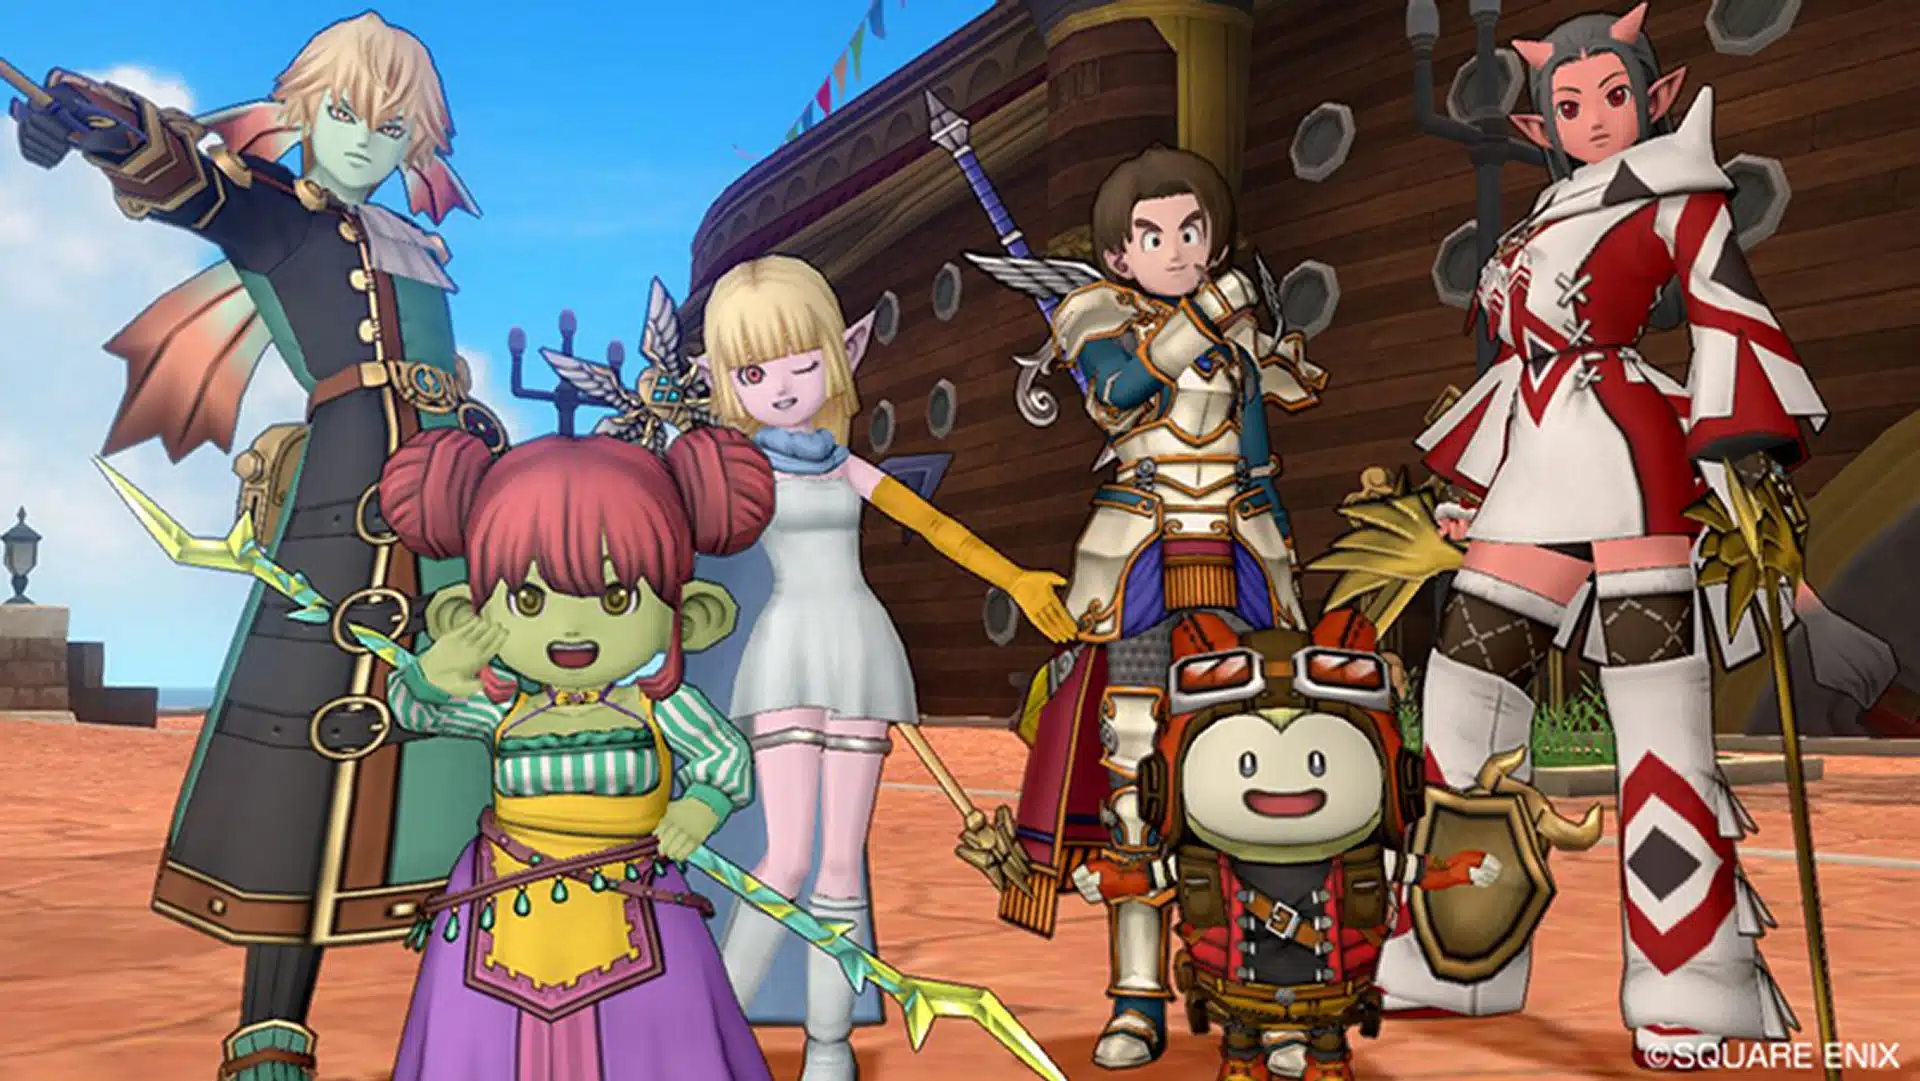 Dragon Quest X Online Version 7.0 Expansion Confirmed; Wii U and 3DS Versions Shutting Down